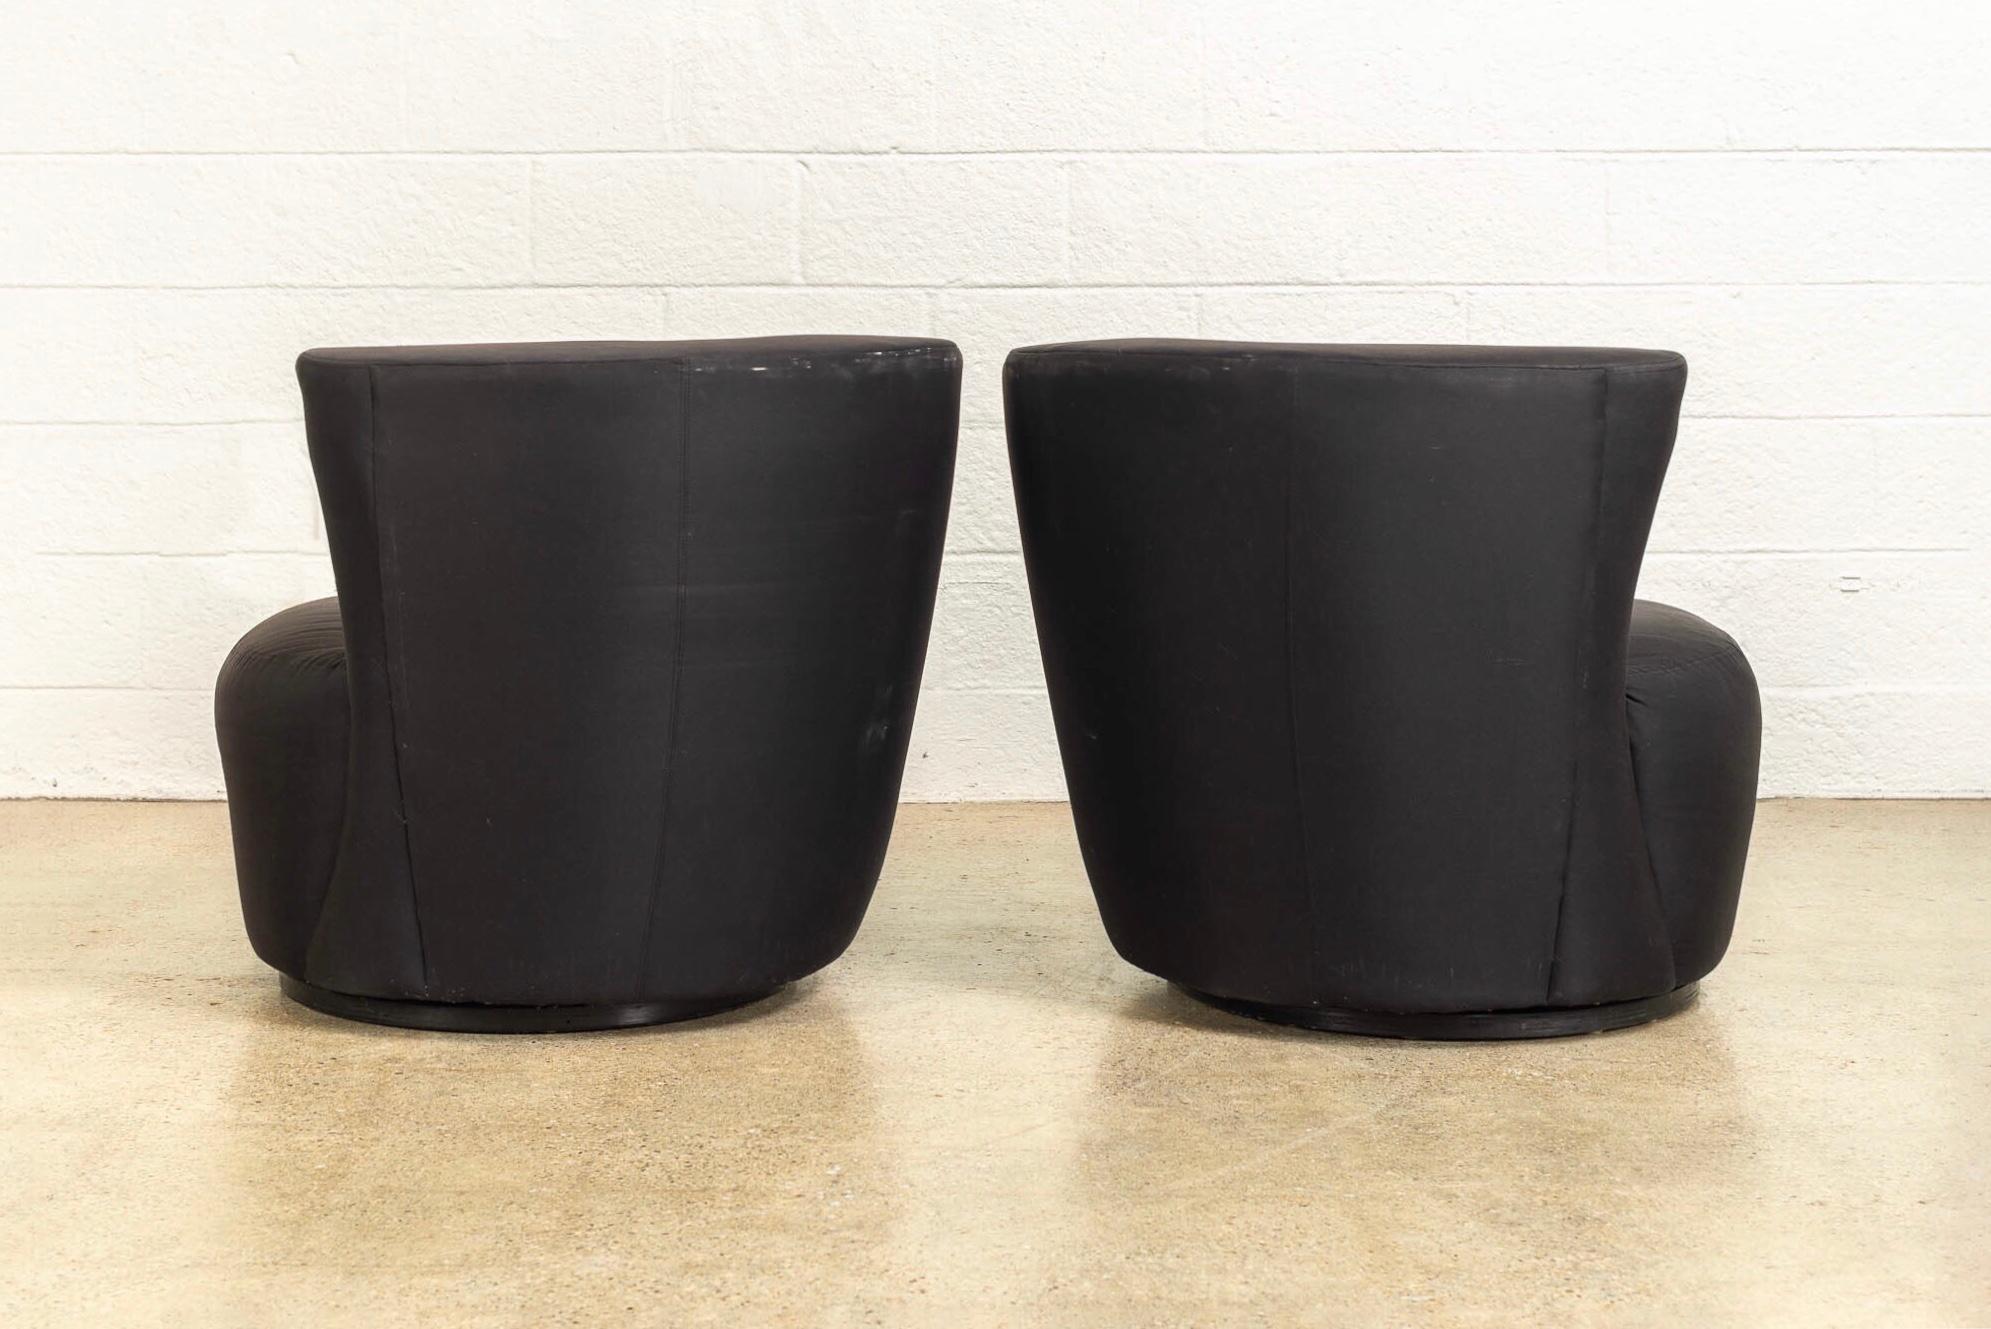 American Midcentury Vladimir Kagan for Directional Black Nautilus Lounge Chairs, a Pair For Sale